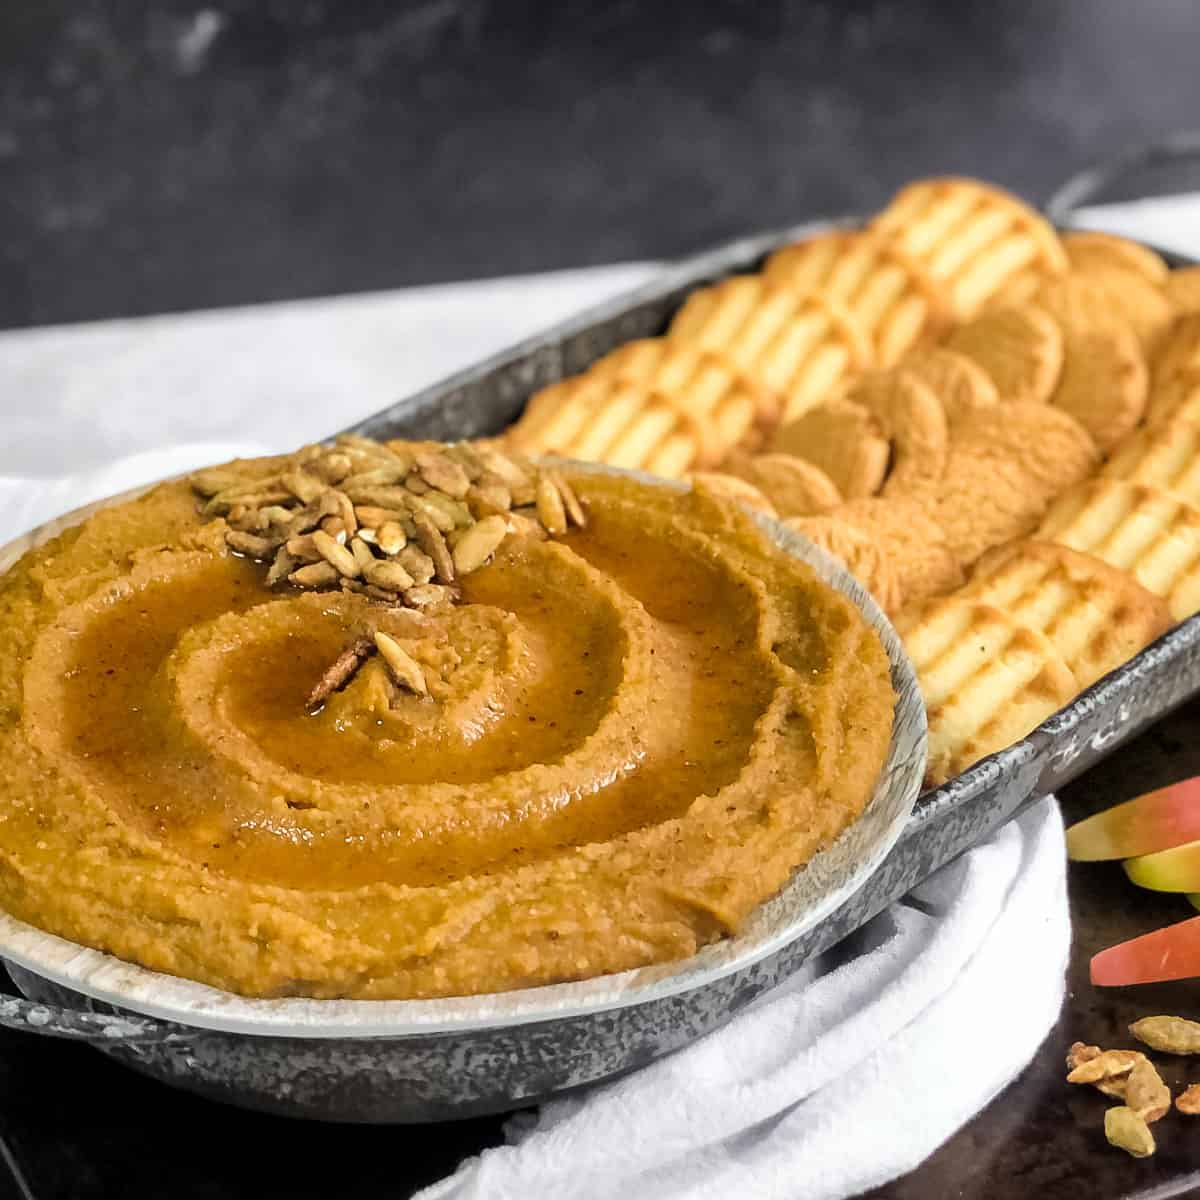 Pumpkin Pie Hummus swirled on a plate drizzled with maple syrup and garnished on the side with cookies and apples for dipping.